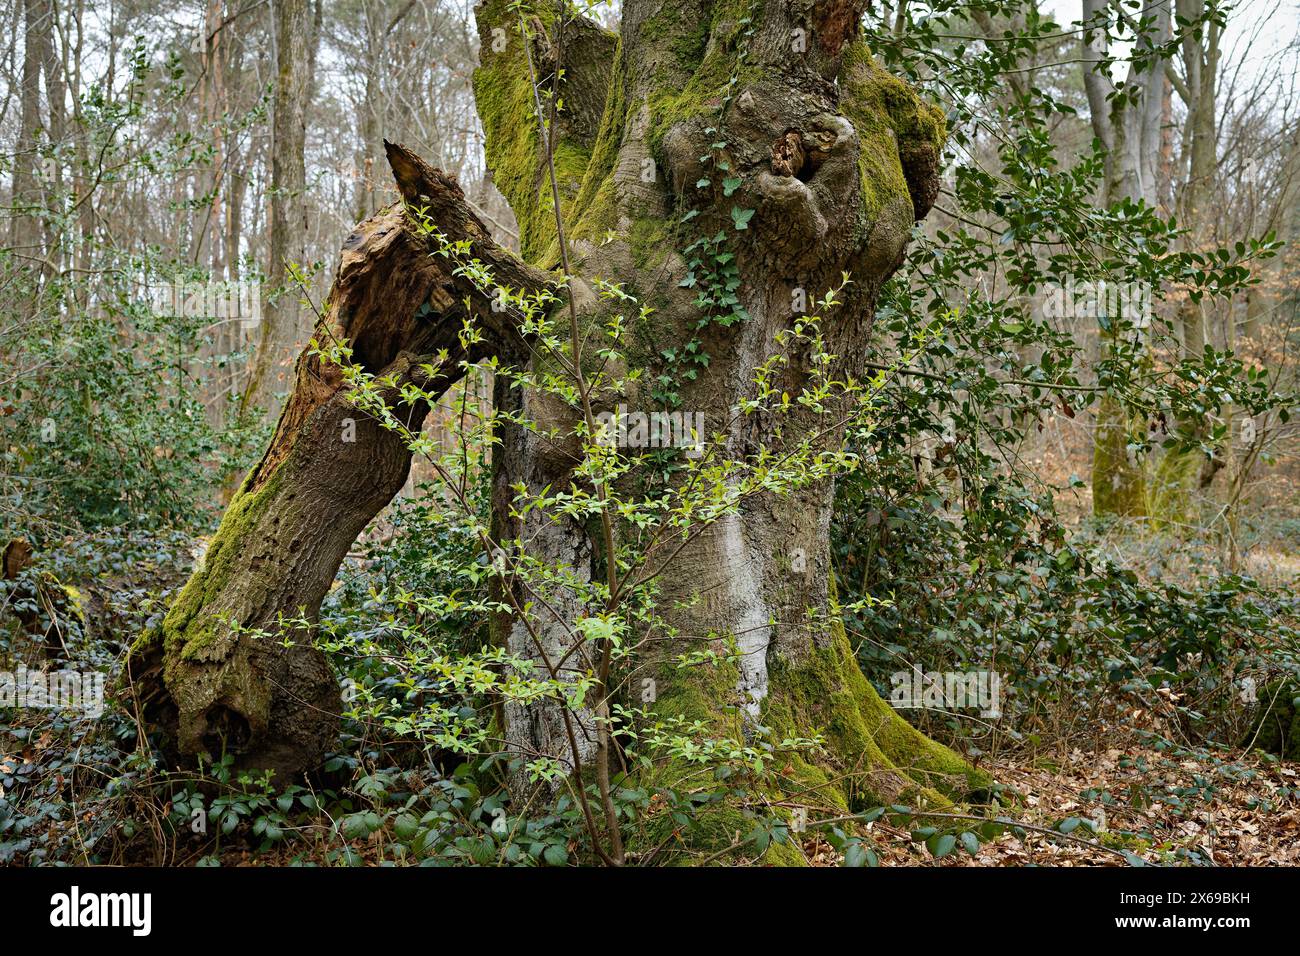 Europe, Germany, North Rhine-Westphalia, Bonn, city, Bonn, Ippendorf, Kottenforst, Waldau, forest, nature reserve, beech, beech tree, tree stump, old tree, dead wood, tree creature, moss-covered trunk, broken branch, atmosphere, mystical, enchanted, foreground young beech, contrast, old and young, background forest, spring, beginning green, daylight, Stock Photo